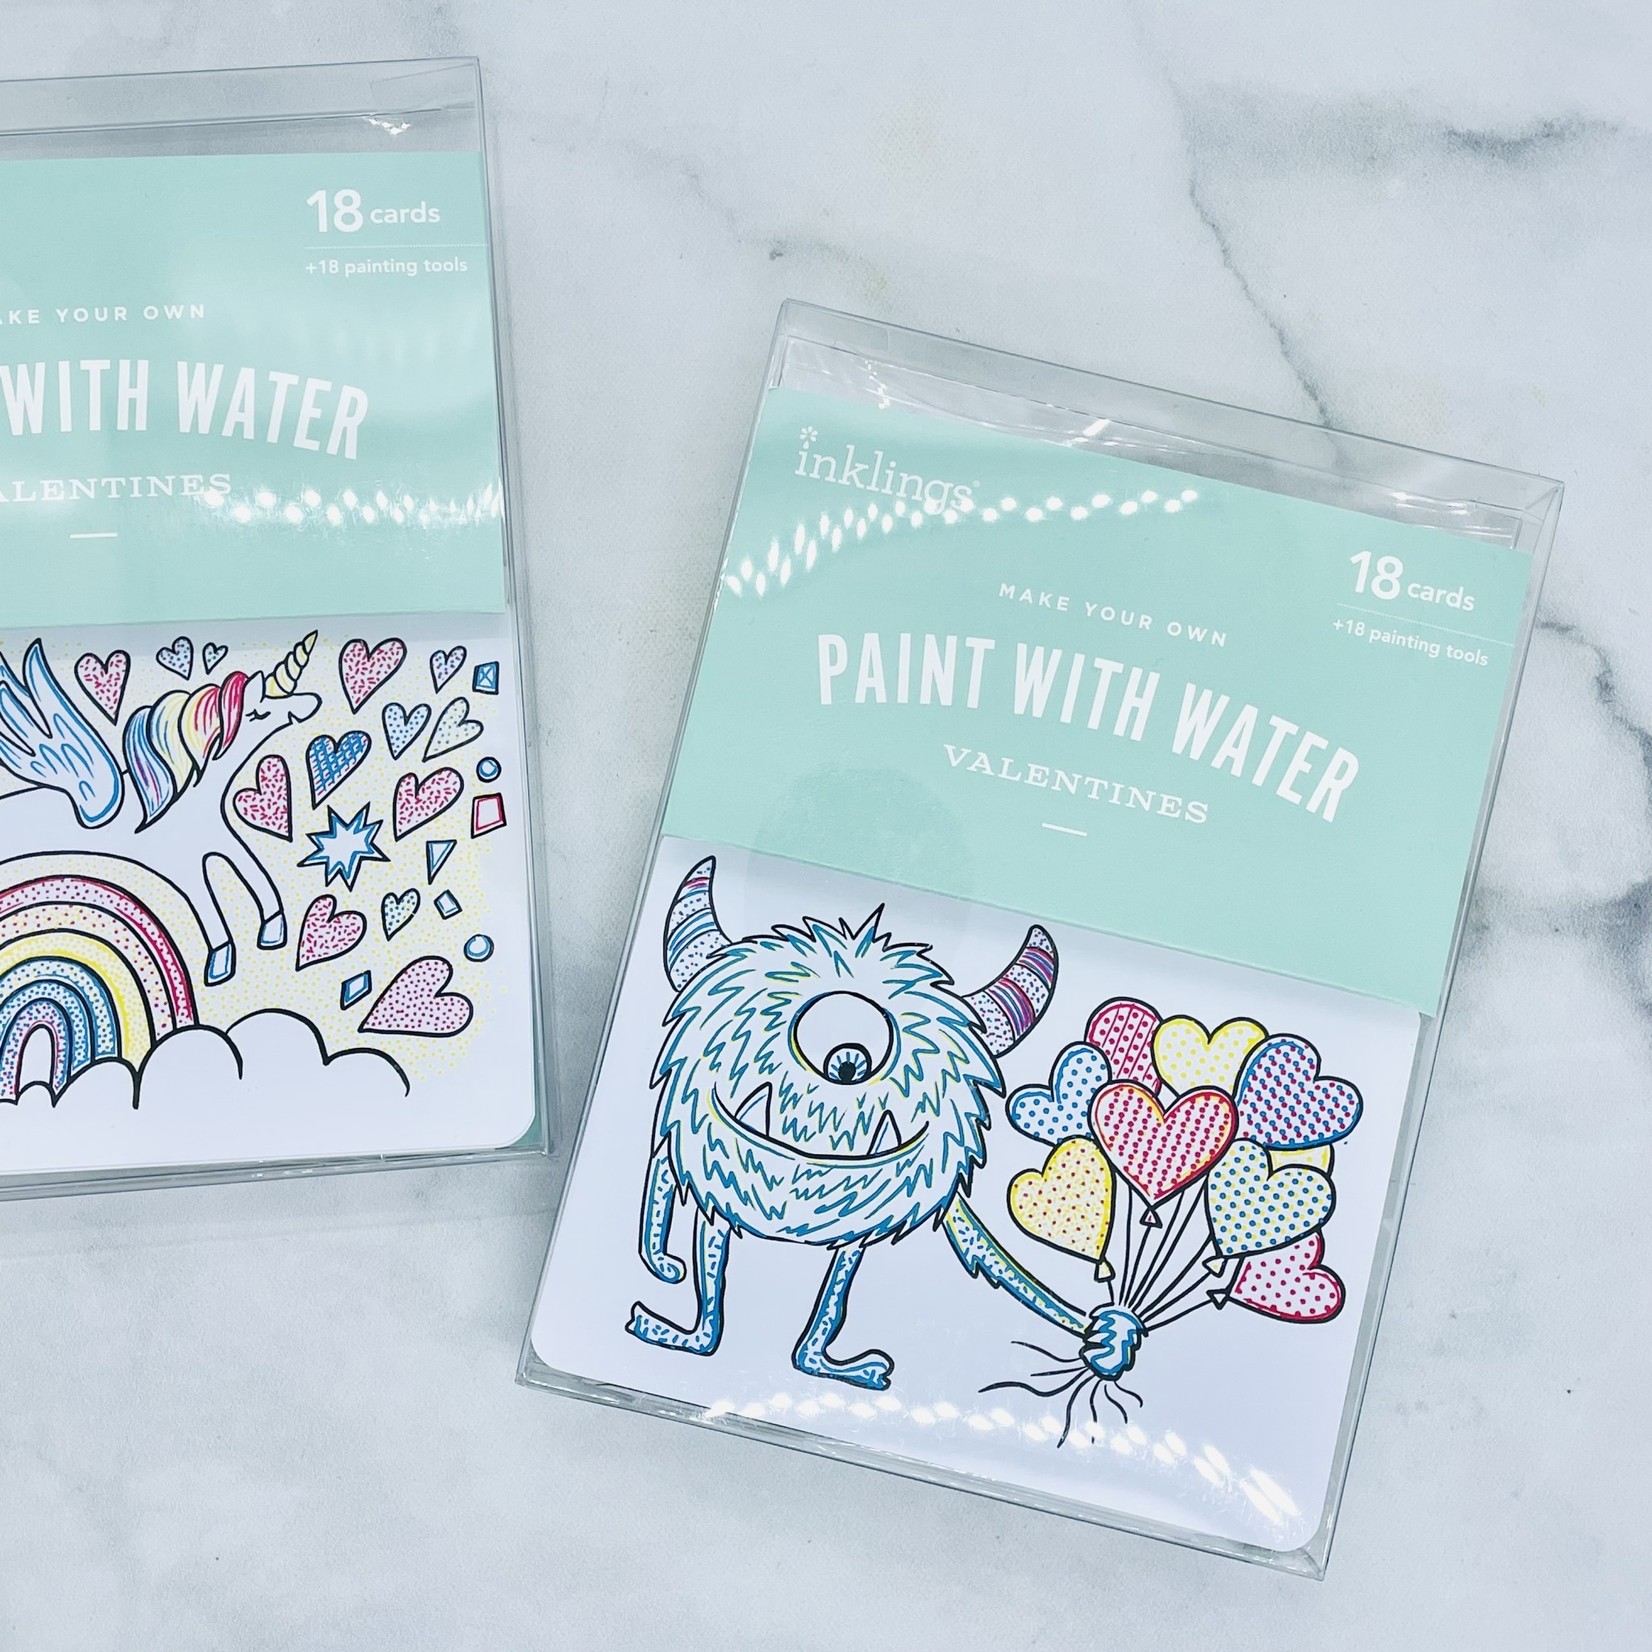 Inkling Paperie Monster Paint with Water Valentines Set